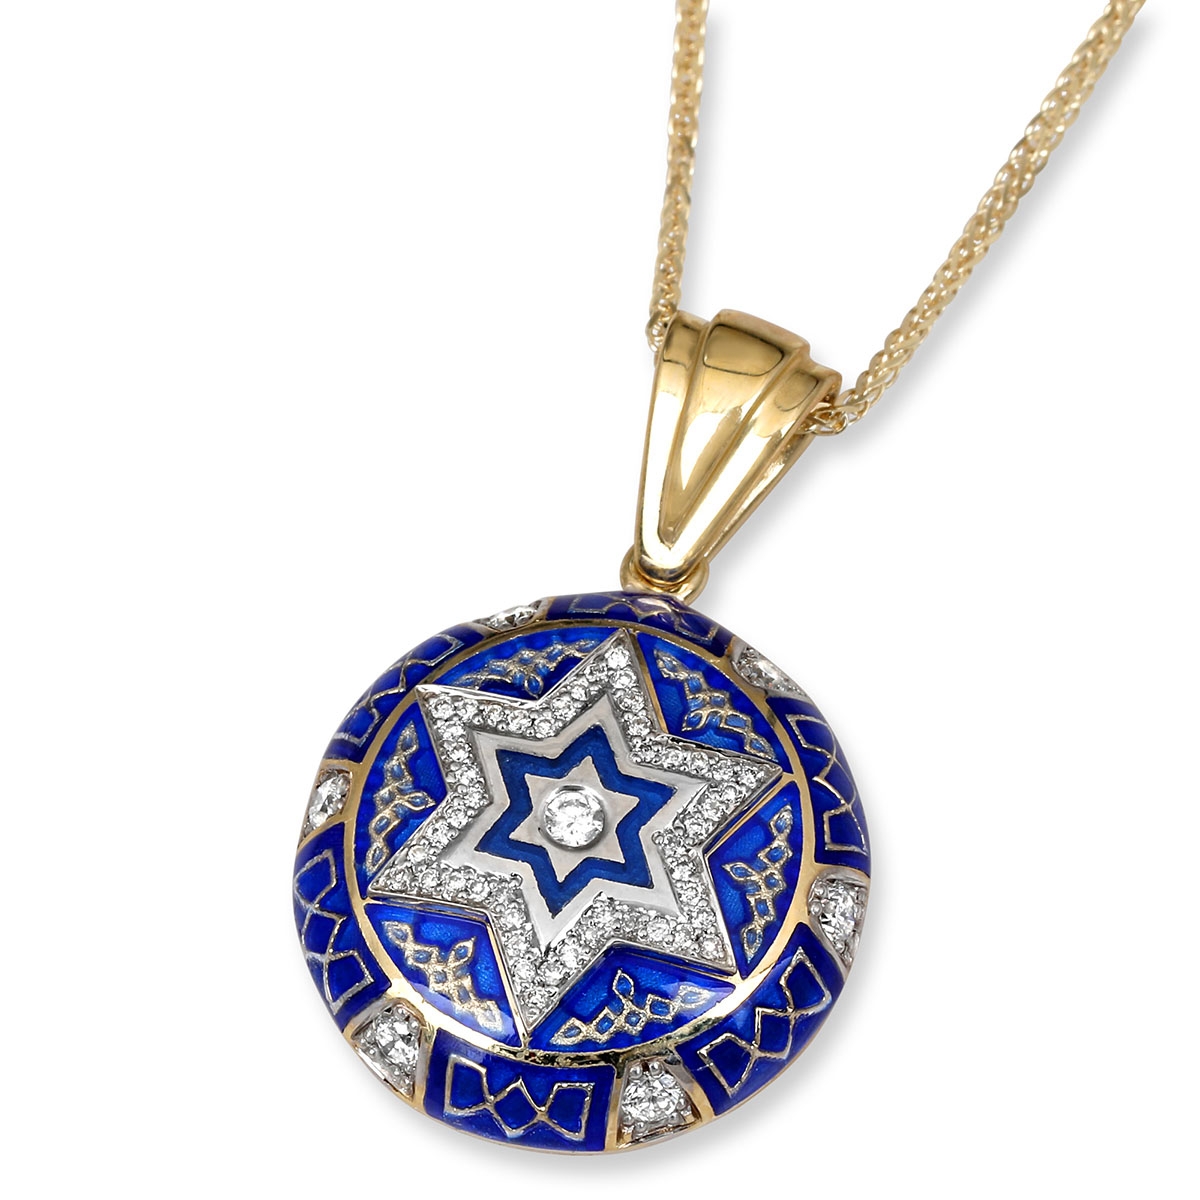 Anbinder Jewelry 14K Gold and Blue Enamel Star of David Pendant With Diamonds - 1